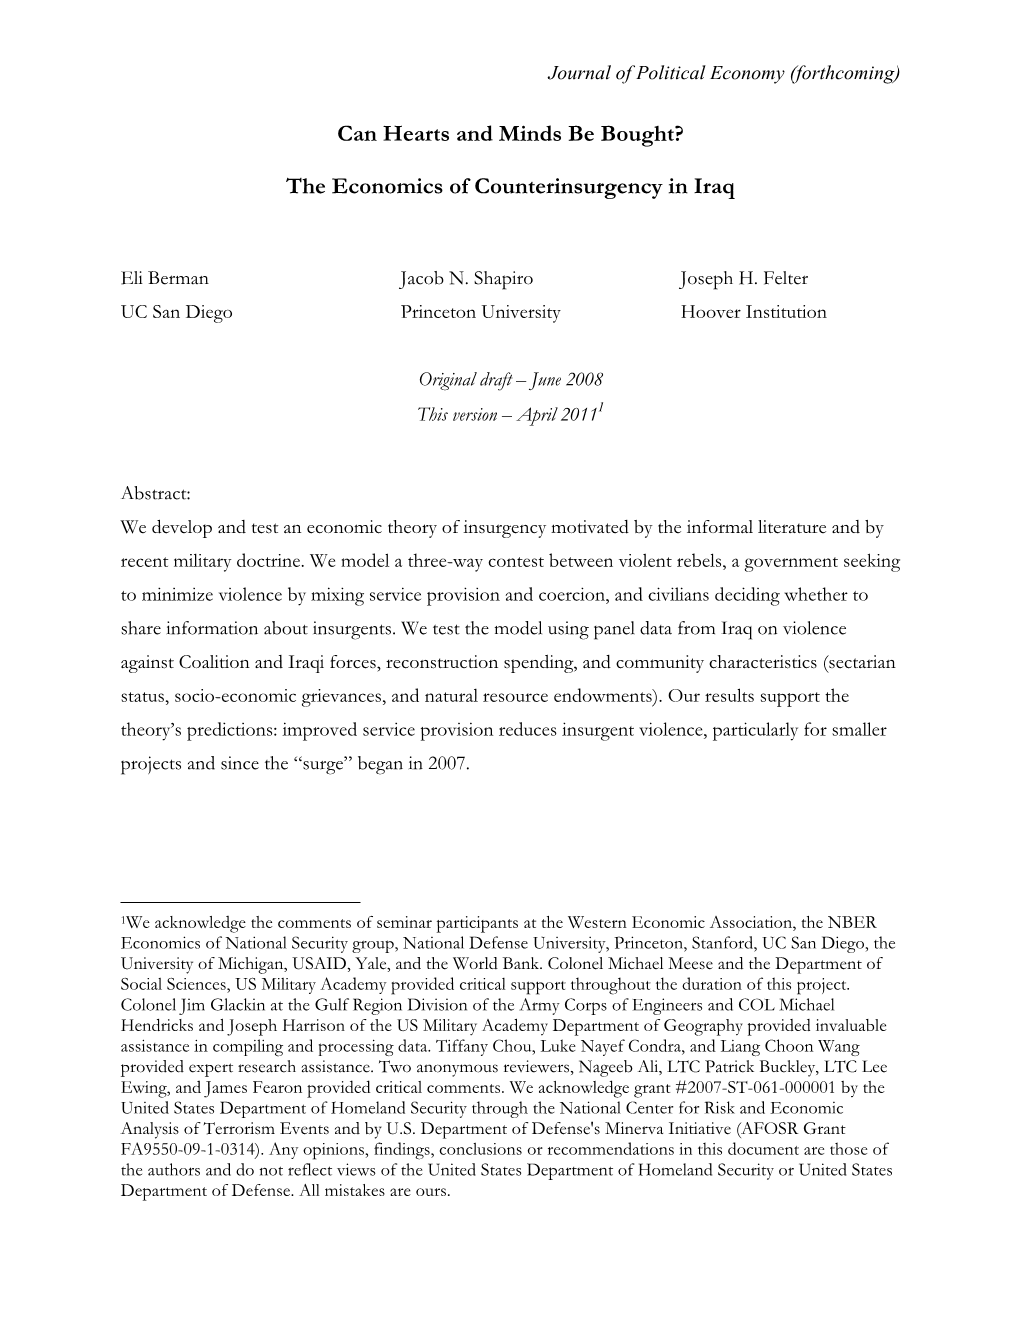 Can Hearts and Minds Be Bought? the Economics of Counterinsurgency in Iraq,” NBER WP #14606, December 2008